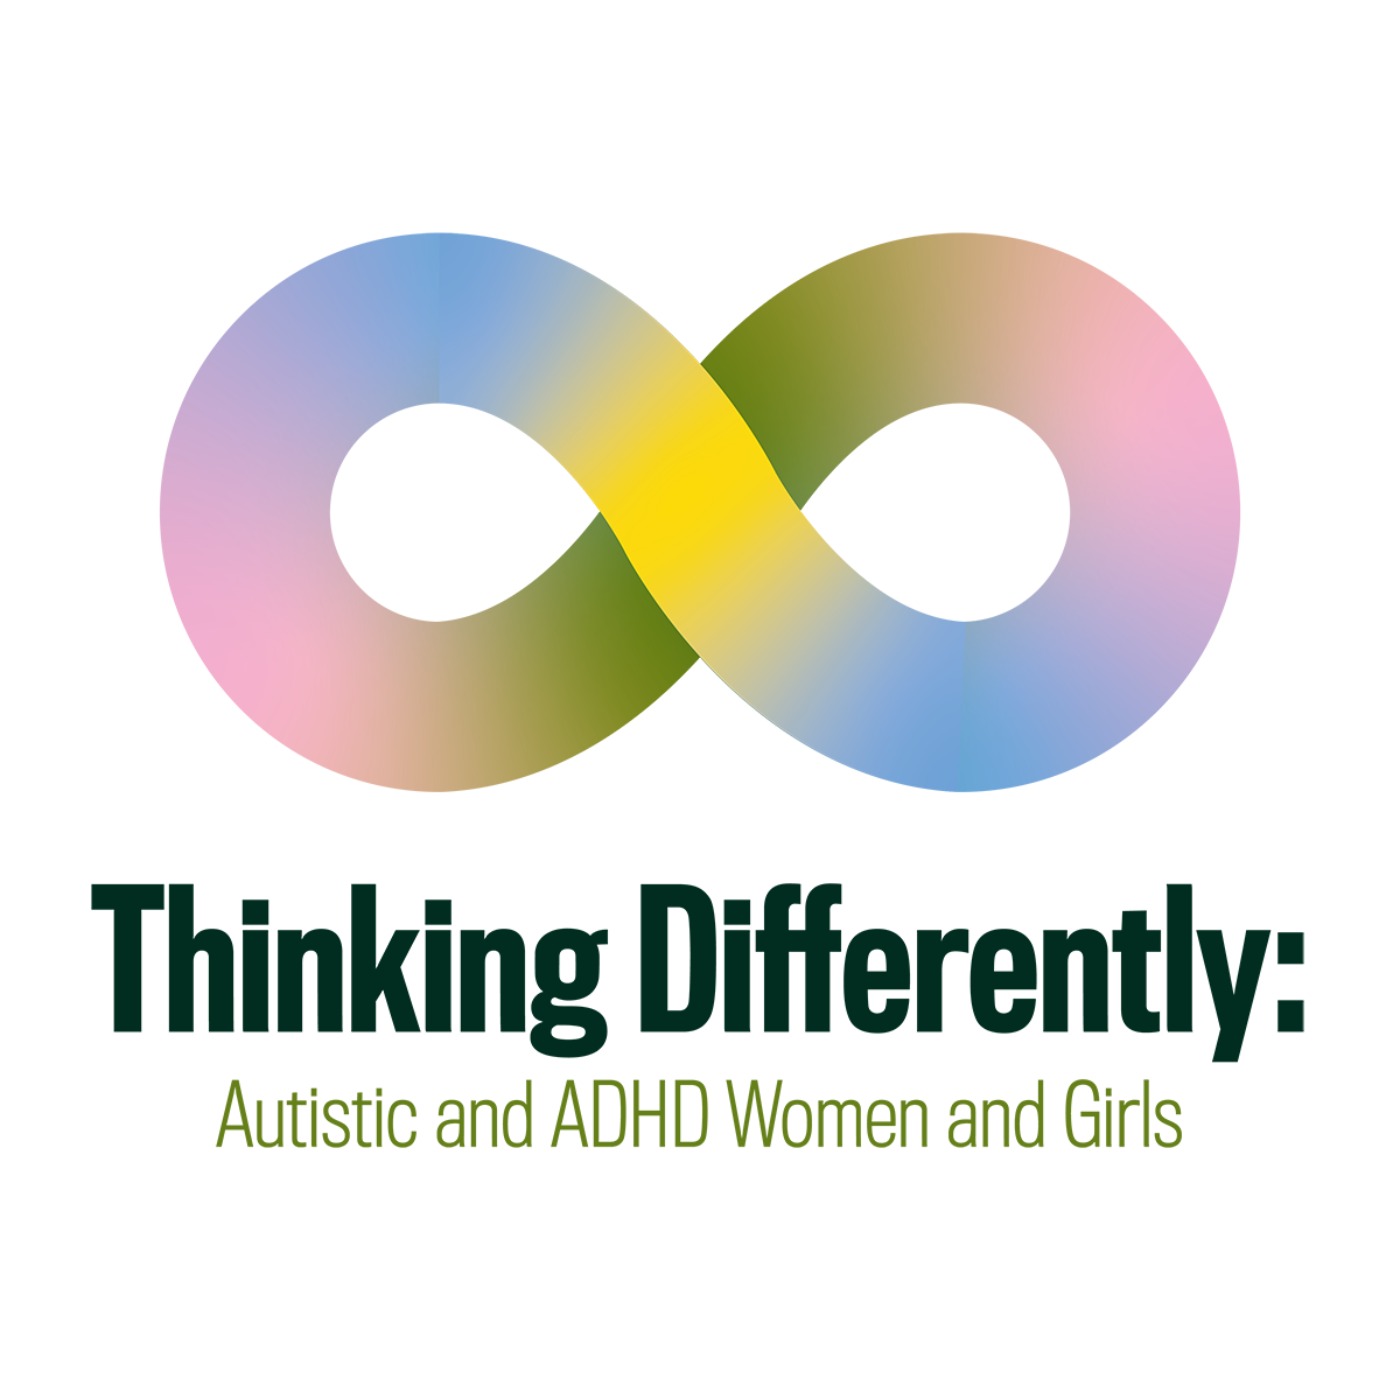 National Federation of Women's Institutes. Ep 1: Thinking Differently